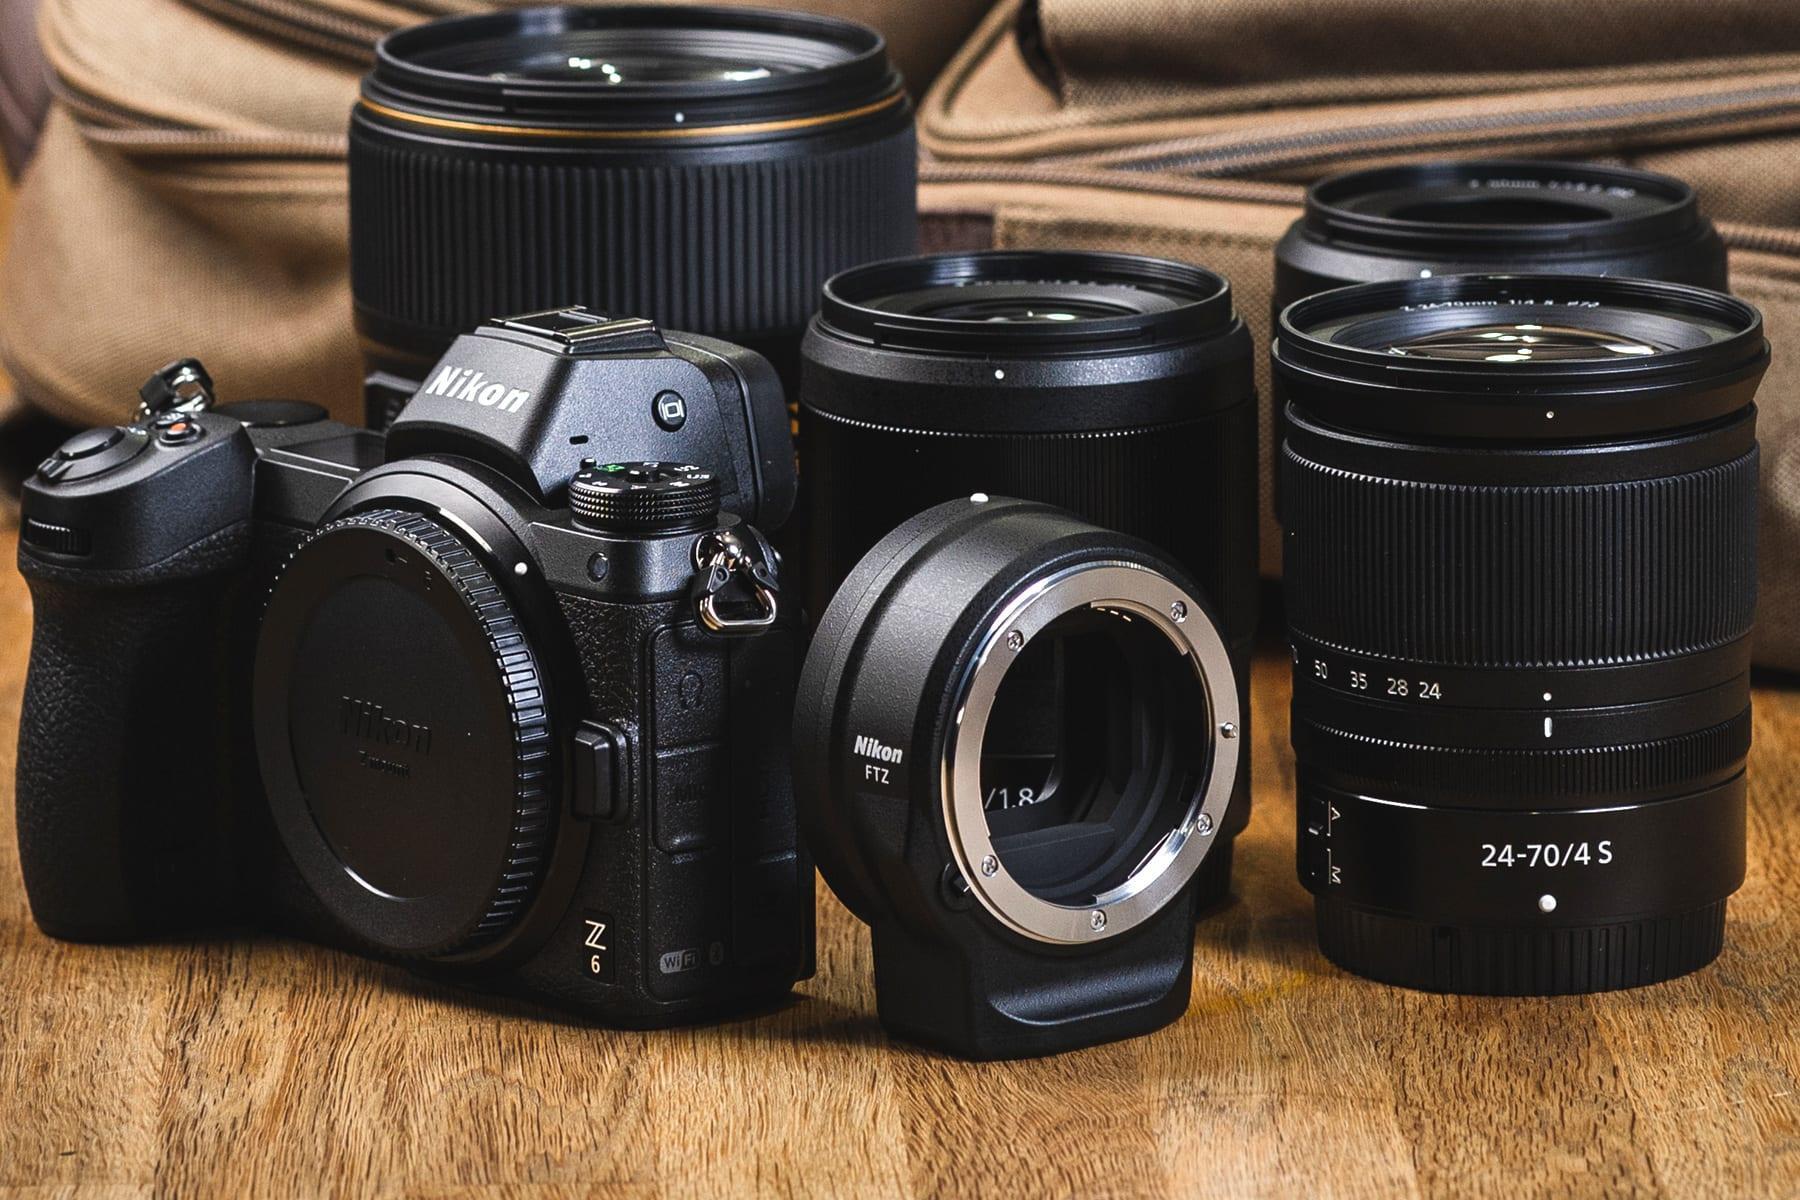 The Digital single lens mirrorless camera (DSLM) purchase guide